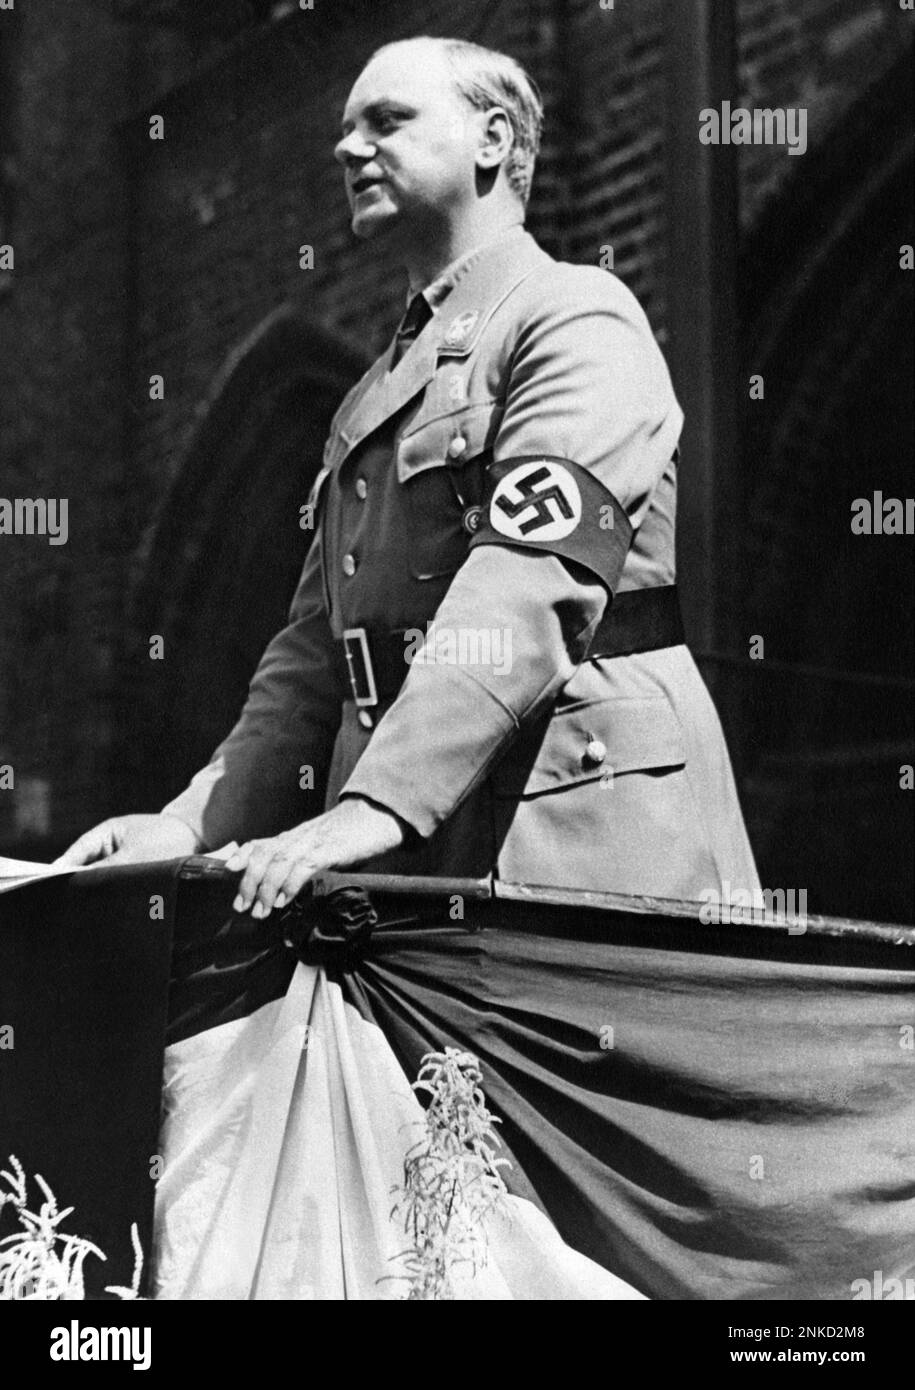 1935 ca , GERMANY  : The german Nazi ALFRED ROSENBERG ( 1893 - 1946 ) .Was an early and intellectually influential member of the Nazi Party . He is considered one of the main authors of key Nazi ideological creeds  including its racial theory, persecution of the Jews , Lebensraum, abrogation of the Treaty of Versailles and opposition to ' degenerate ' modern Art . He is also known for his rejection of Christianity .  At Nuremberg he was tried,  sentenced to death and executed by hanging as a war criminal - WWII - NAZI - NAZIST - SECONDA GUERRA MONDIALE - NAZISMO - NAZISTA  - POLITICA - POLITIC Stock Photo